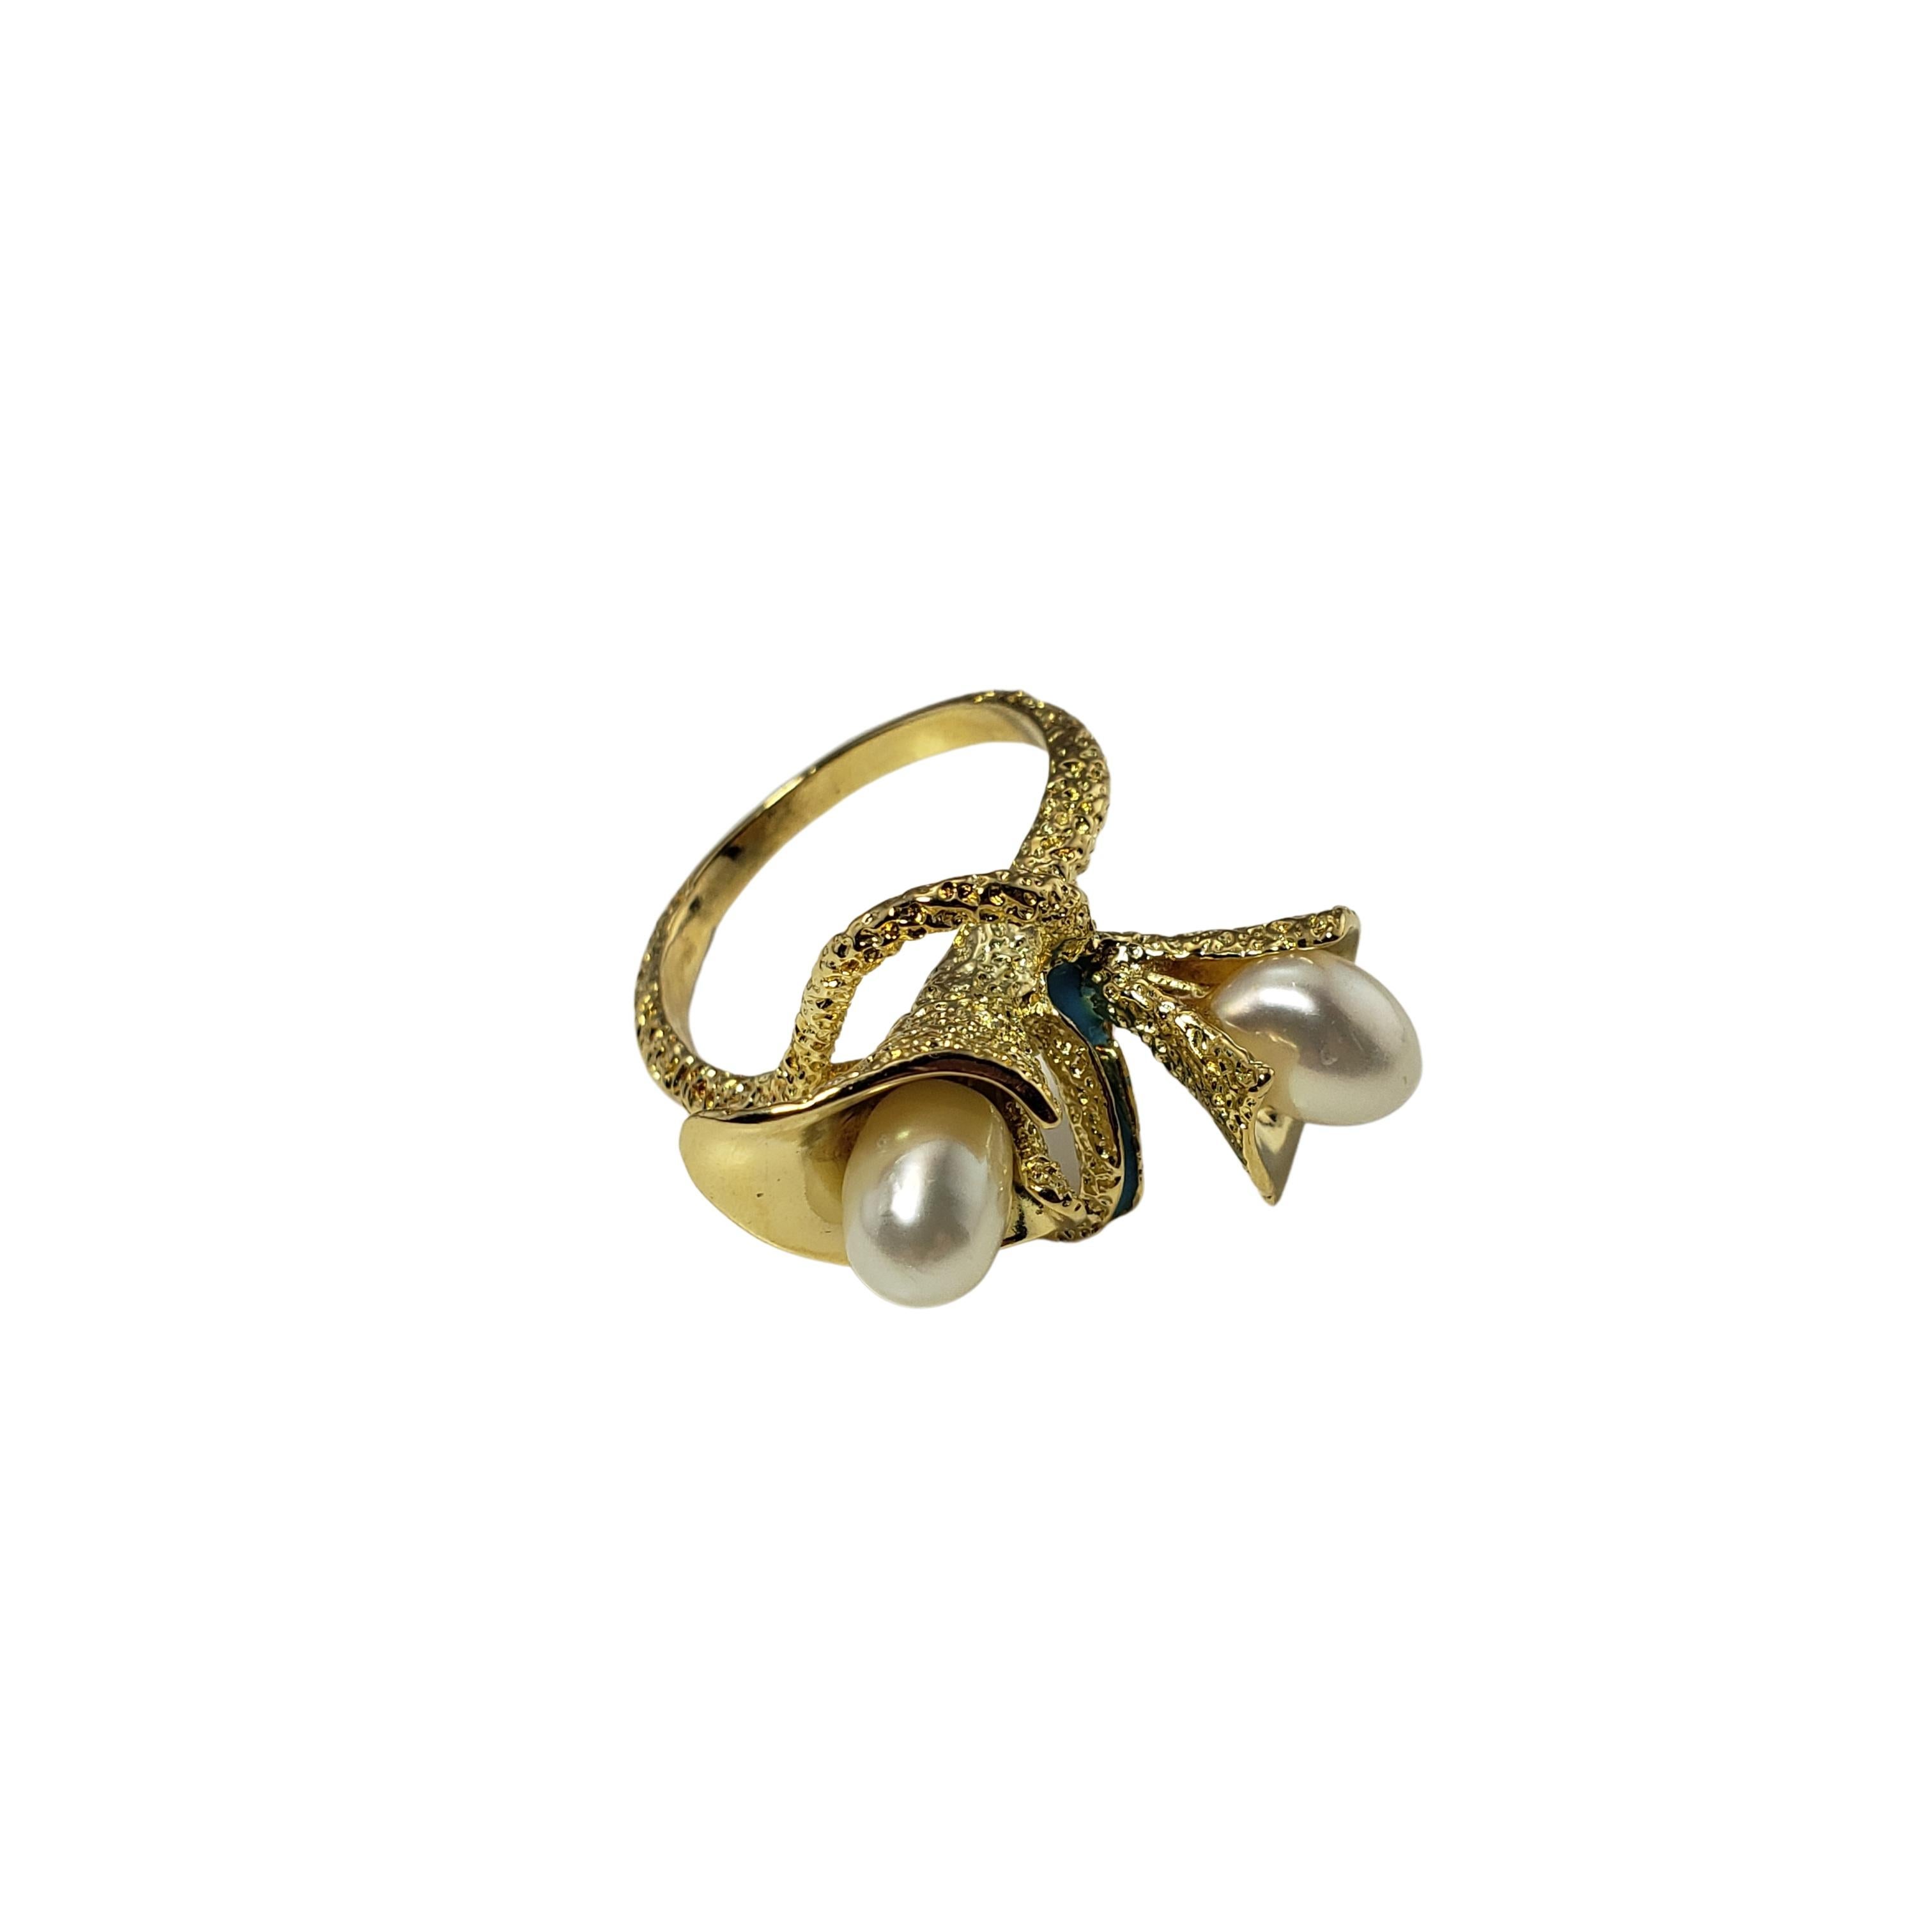 Vintage 18 Karat Yellow Gold and Pearl Calla Lily Ring Size 6.5-

This lovely calla lily ring features two white pearls (7 mm x 6 mm) set in beautifully detailed 18K yellow gold and accented with blue enamel. Shank: 2 mm.

Size: 6.5

Weight: 4.5